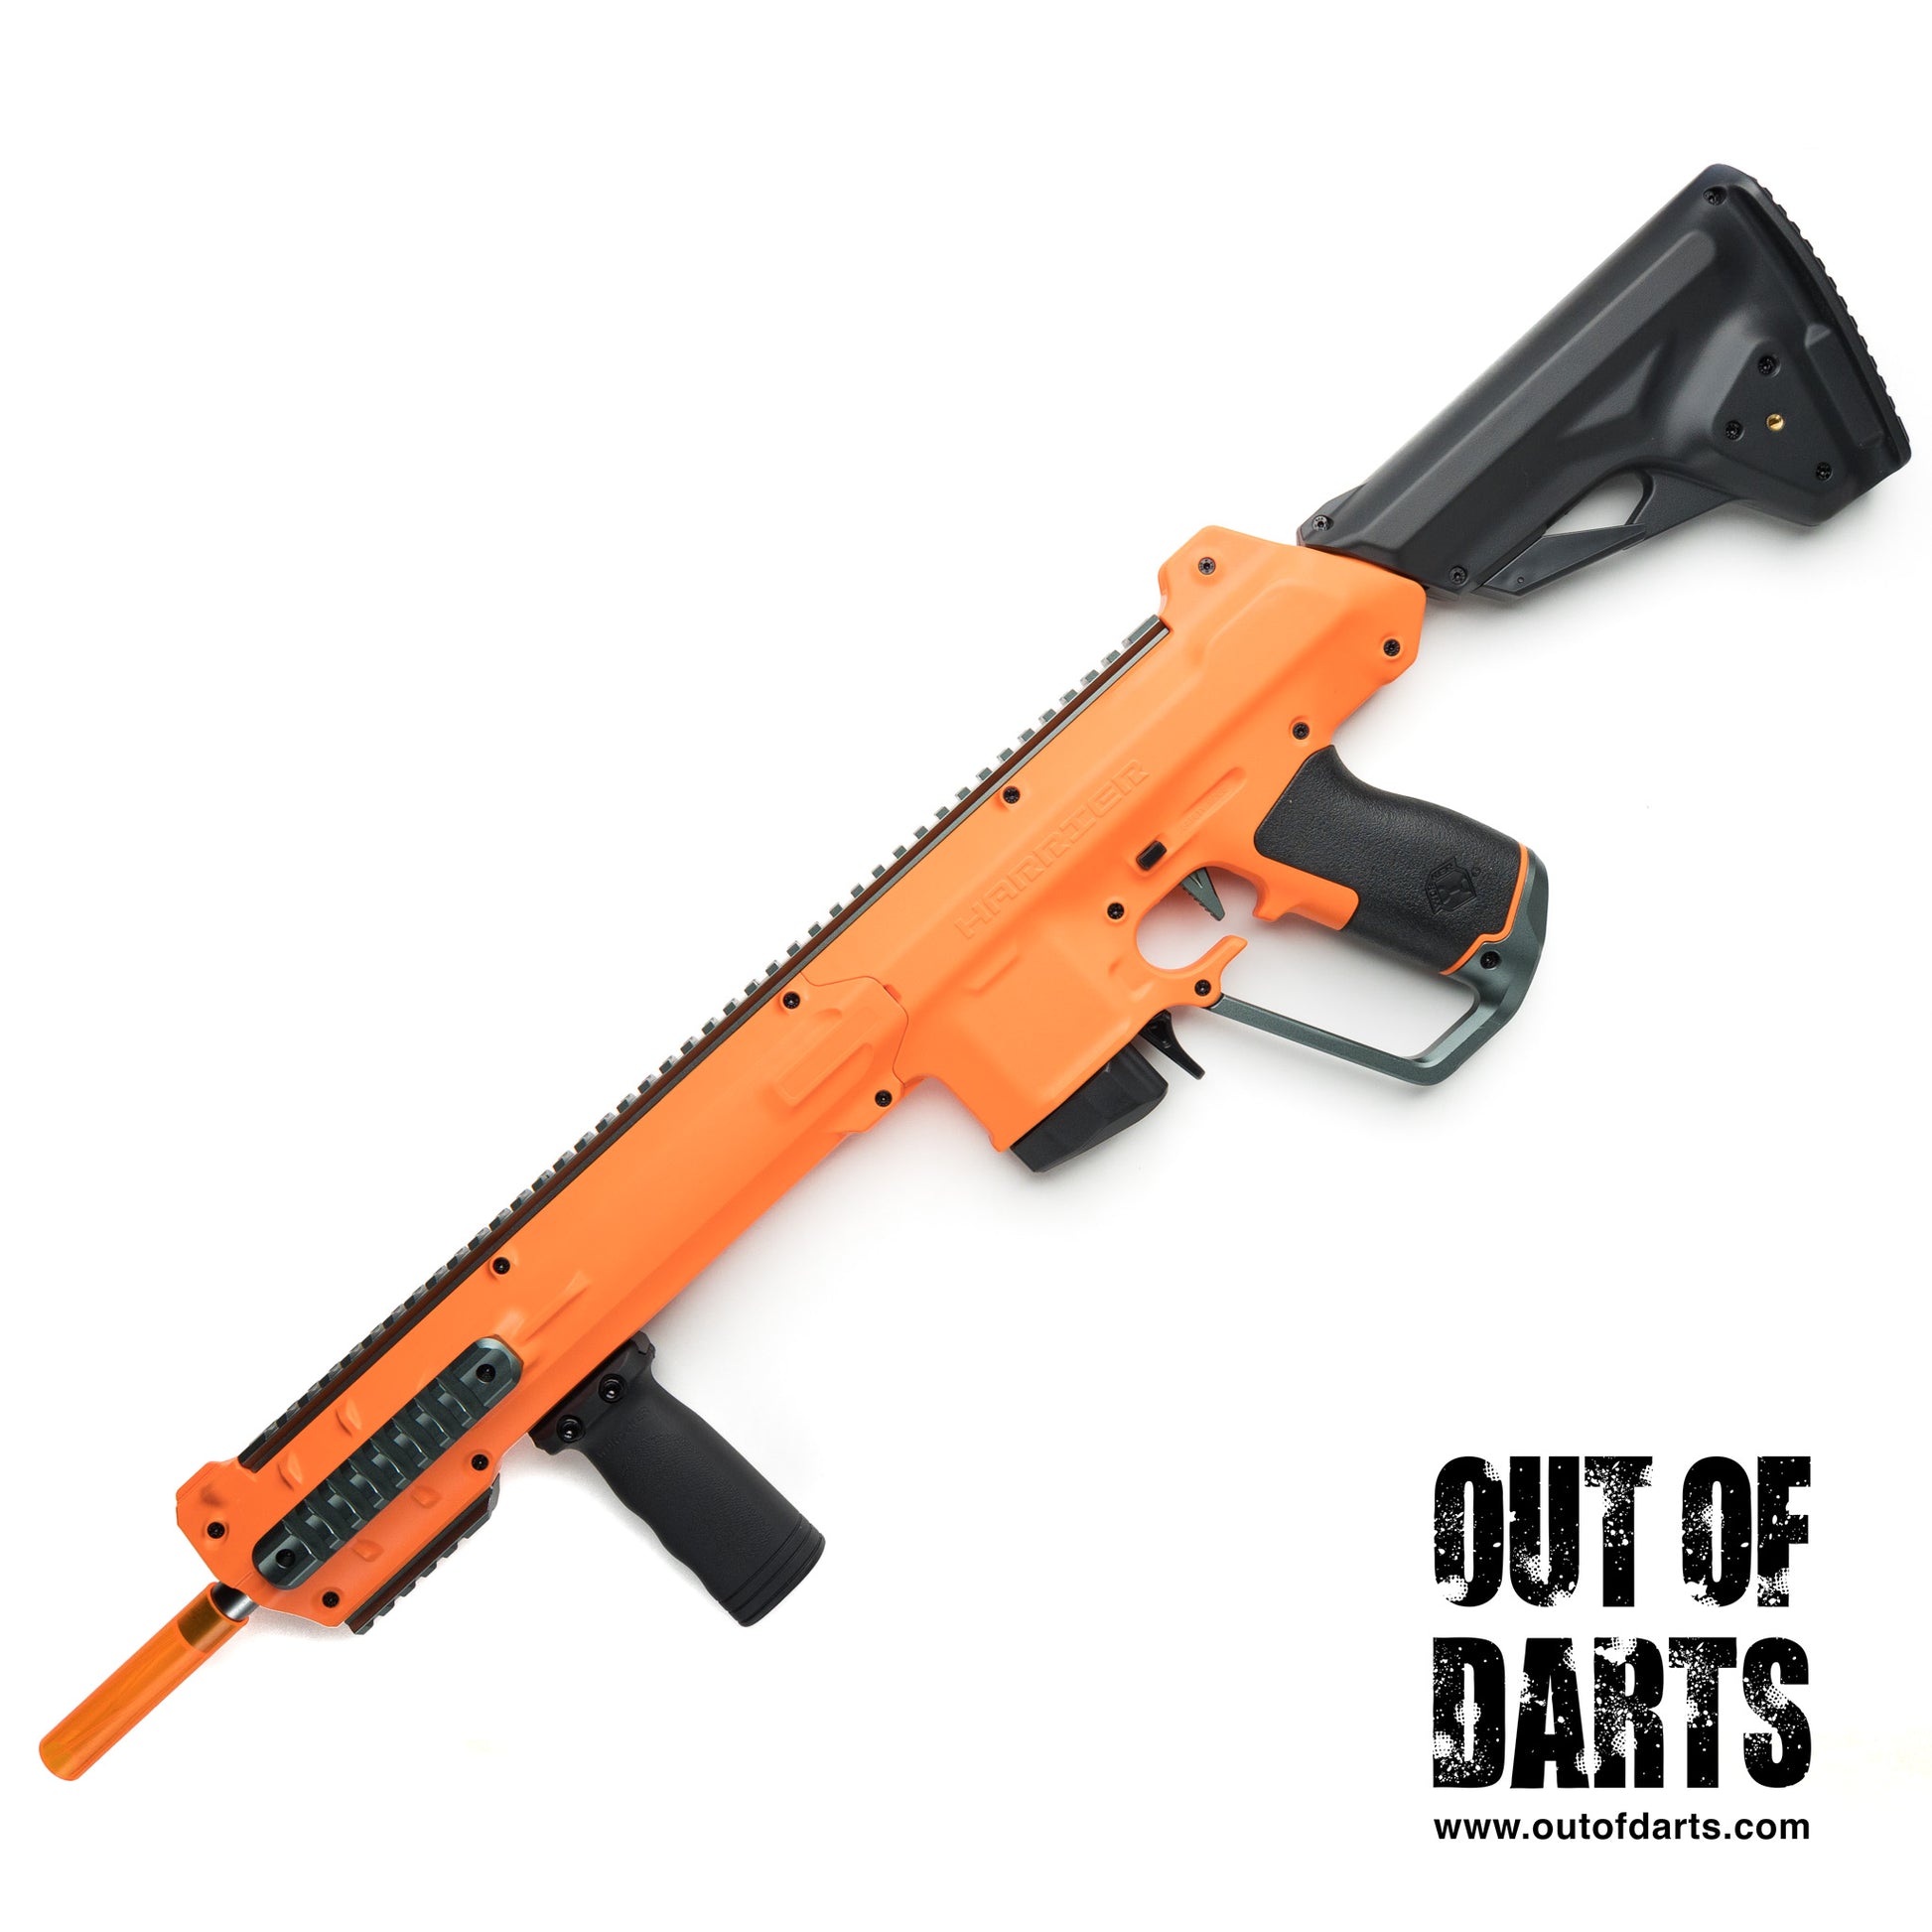 The armory is growing rapidly : r/Nerf